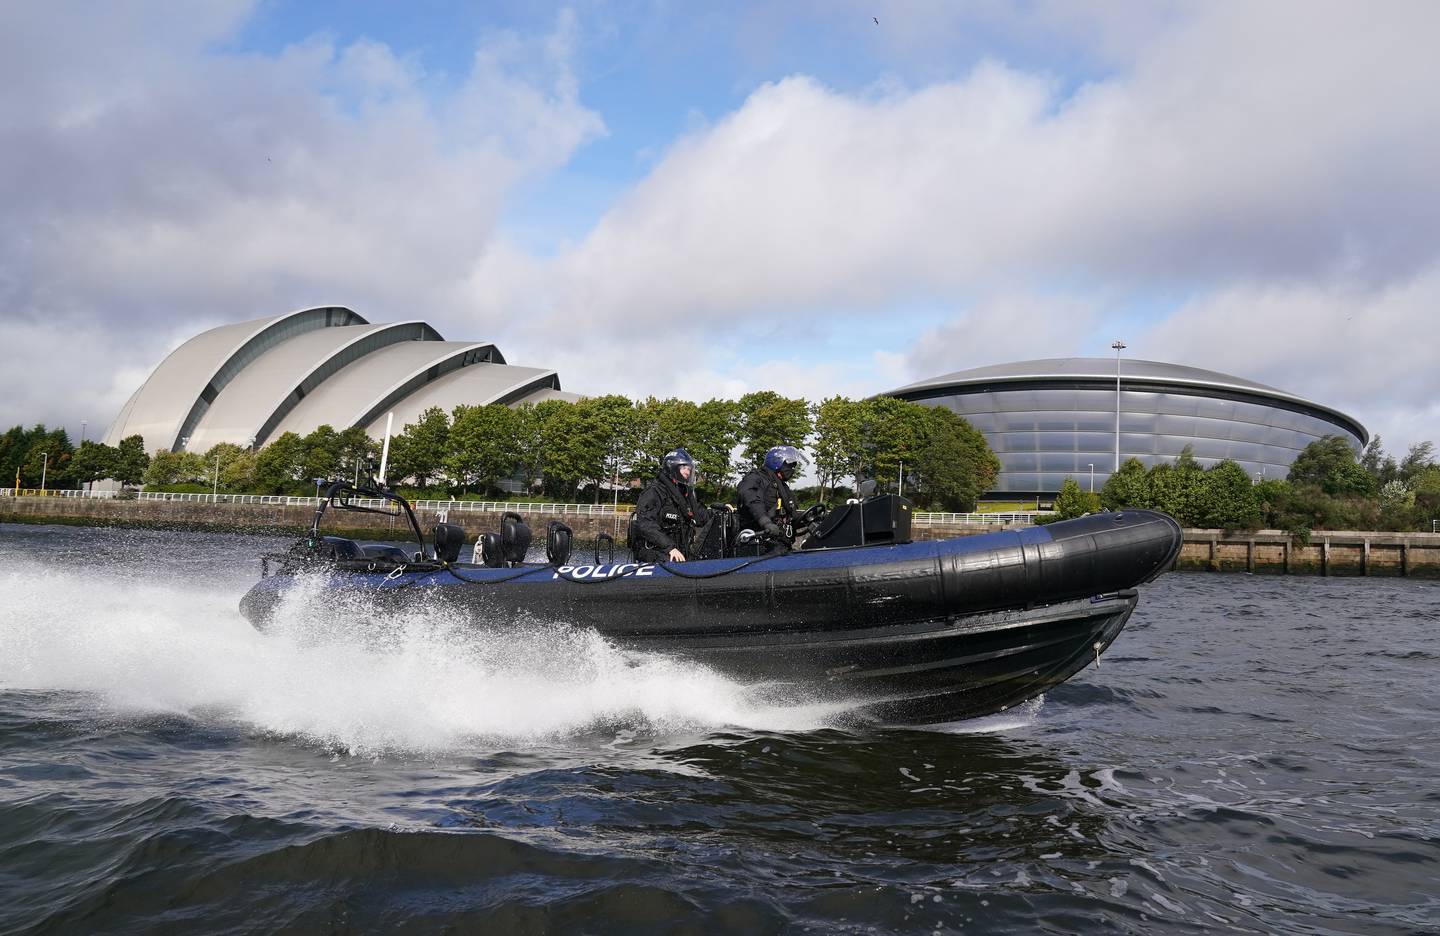 A Ministry of Defence police marine unit takes part in a training session next to the Armadillo and the Hydro at the Scottish Event Campus, the venue for the Cop26 summit in Glasgow. PA